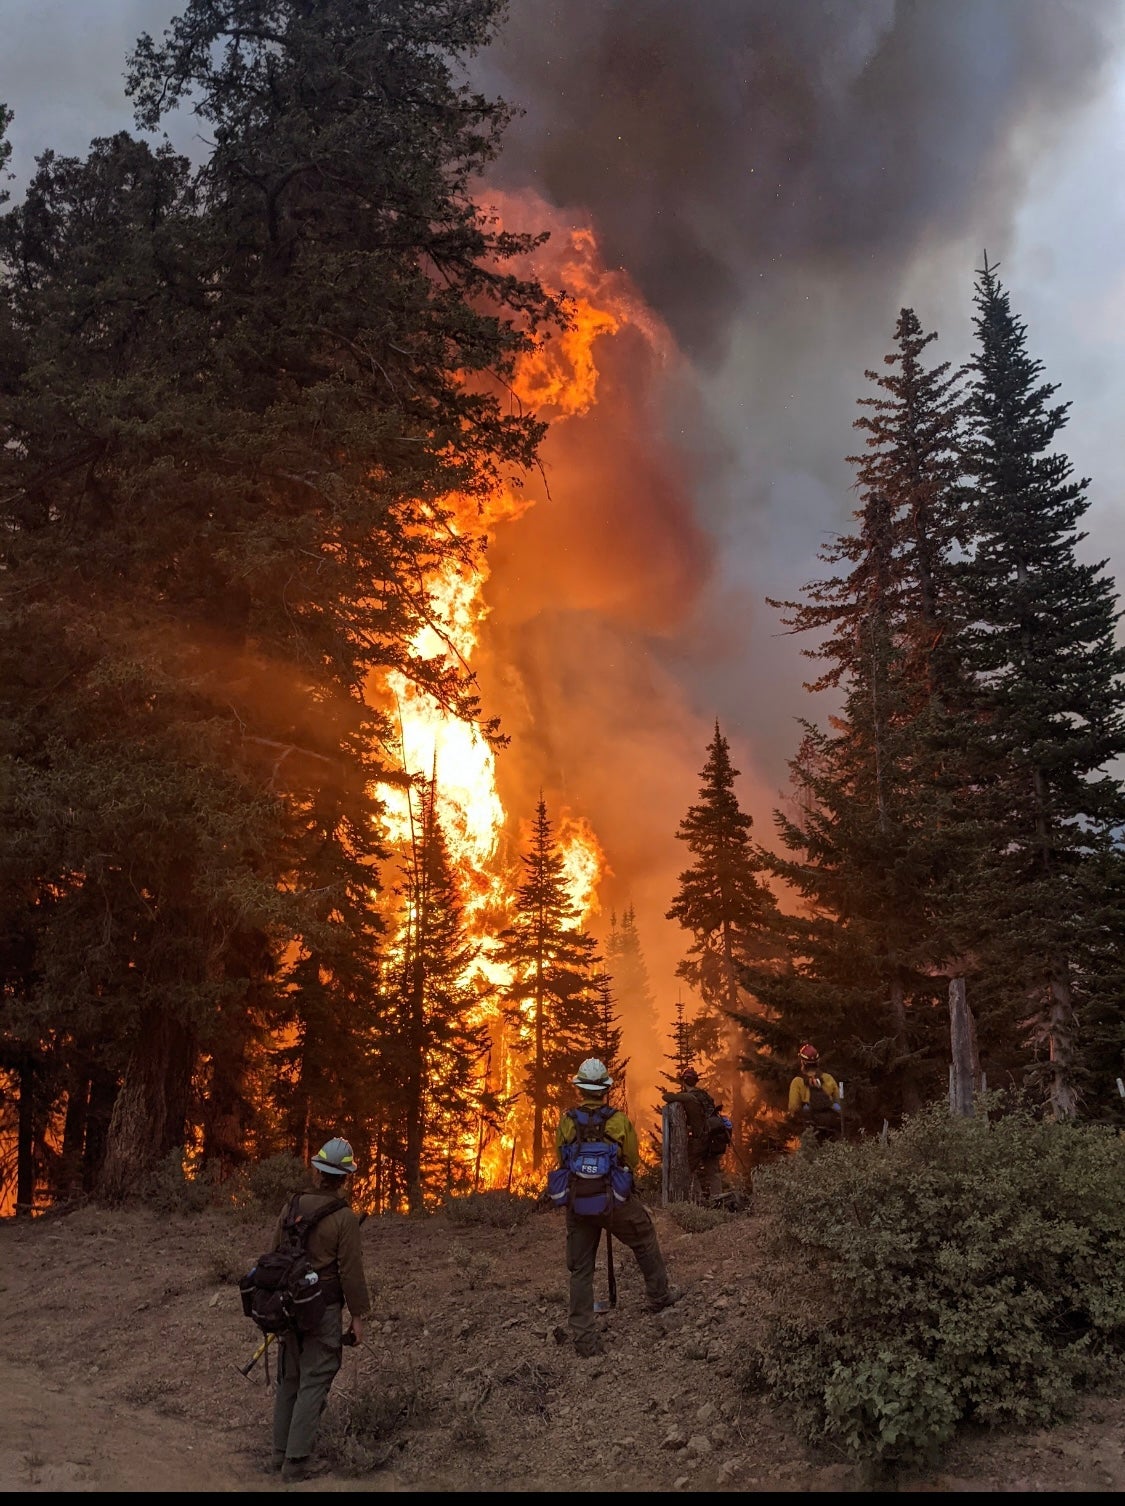 A wildland firefighting crew assess a fire in Washington state in 2021